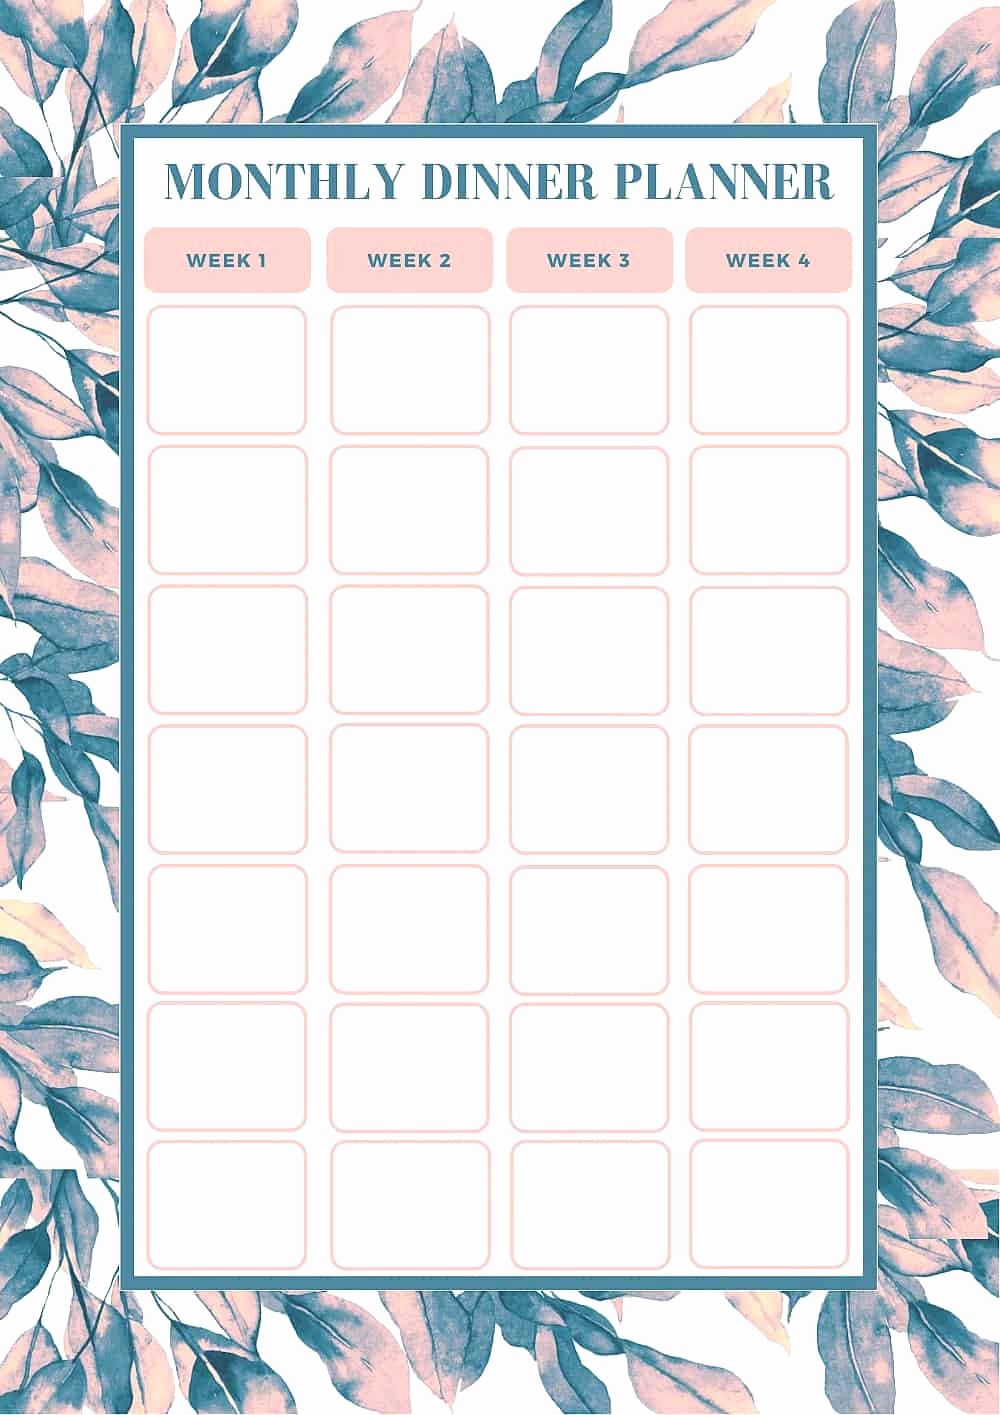 Weekly Meal Planning Template Free Awesome Free Monthly Meal Planning Template Bake Play Smile